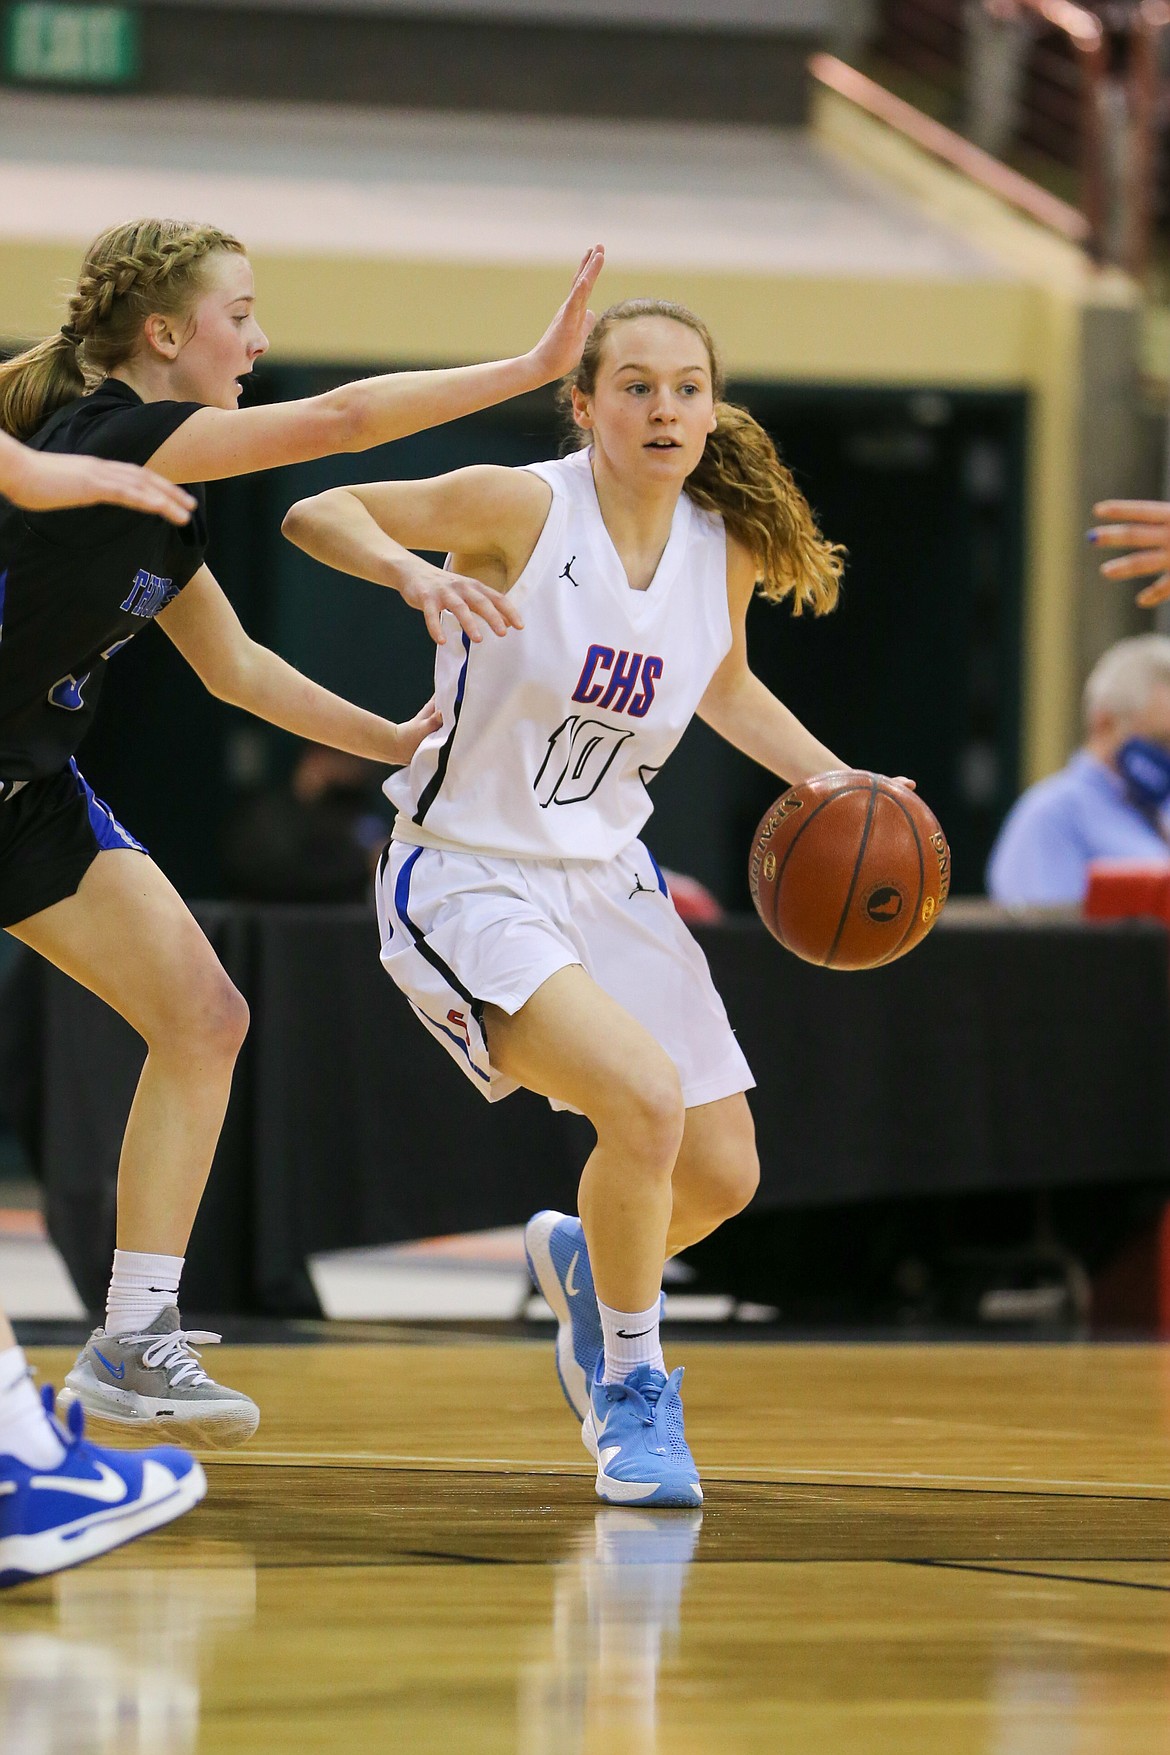 JASON DUCHOW PHOTOGRAPHY
Emma Whiteman (10) of Coeur d'Alene dribbles against Thunder Ridge on Friday in a state 5A girls basketball semifinal at the Ford Idaho Center in Nampa.